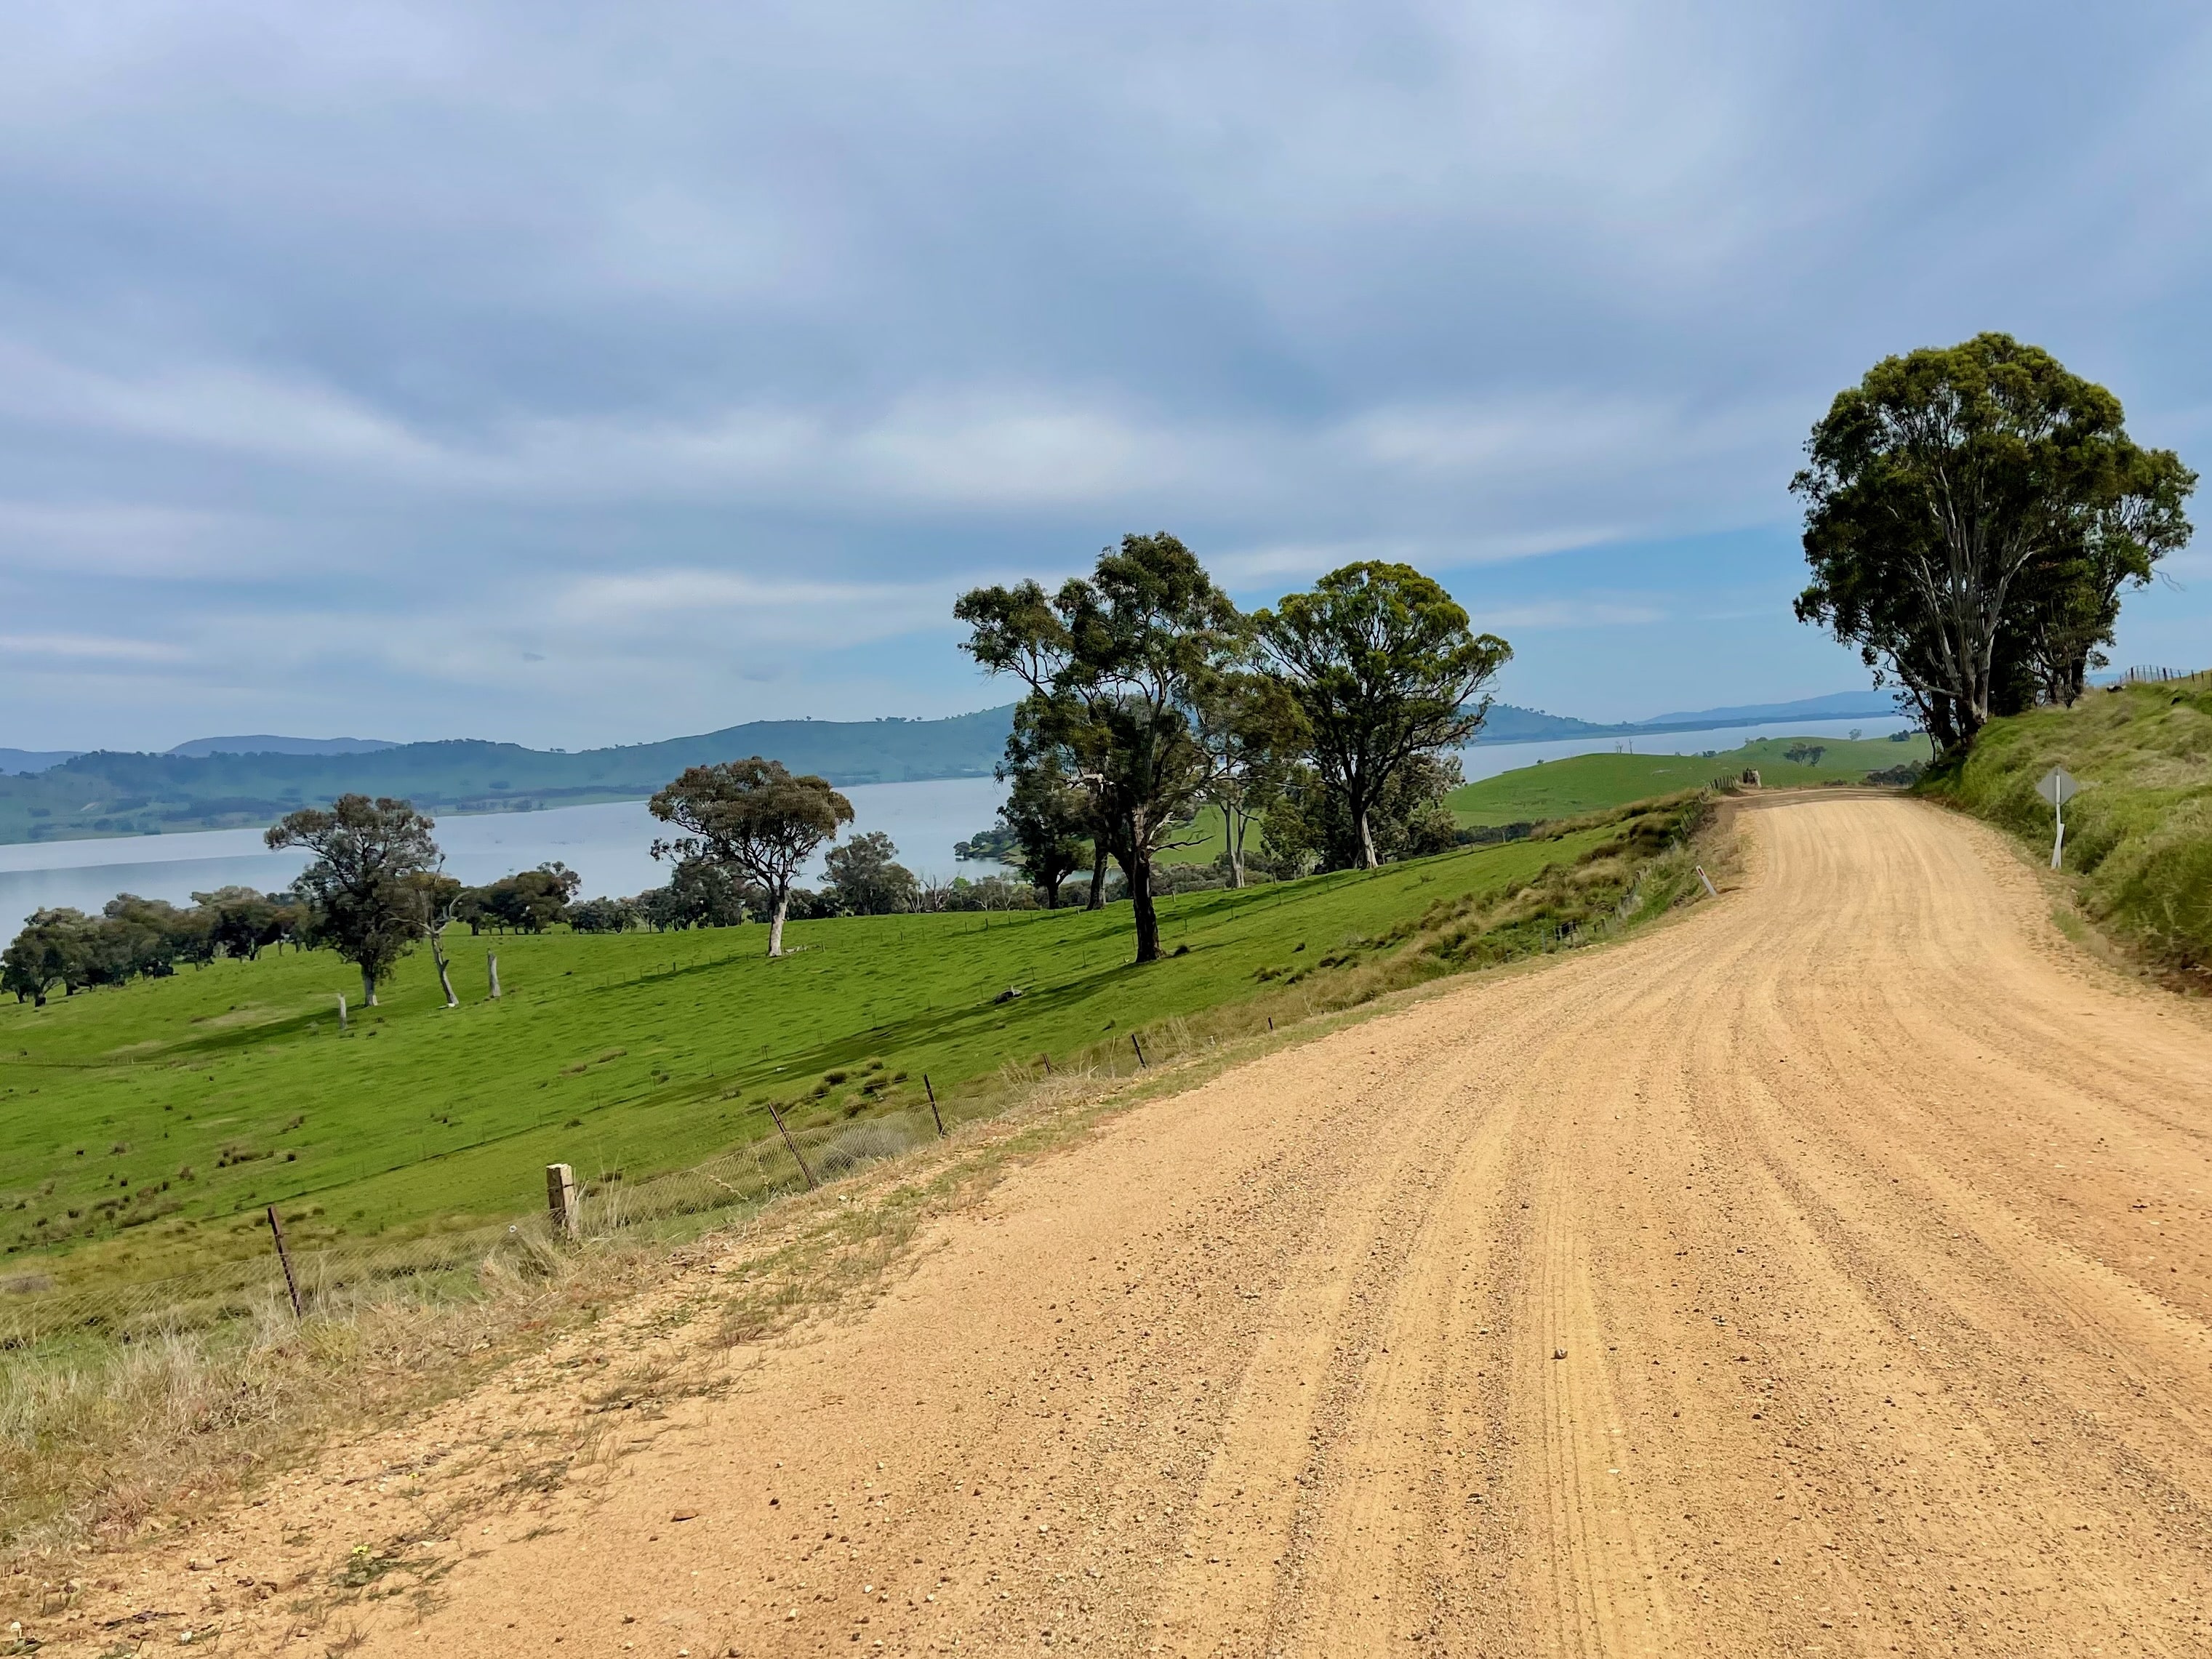 Gravel road winding through open farmland with views of lake in the distance